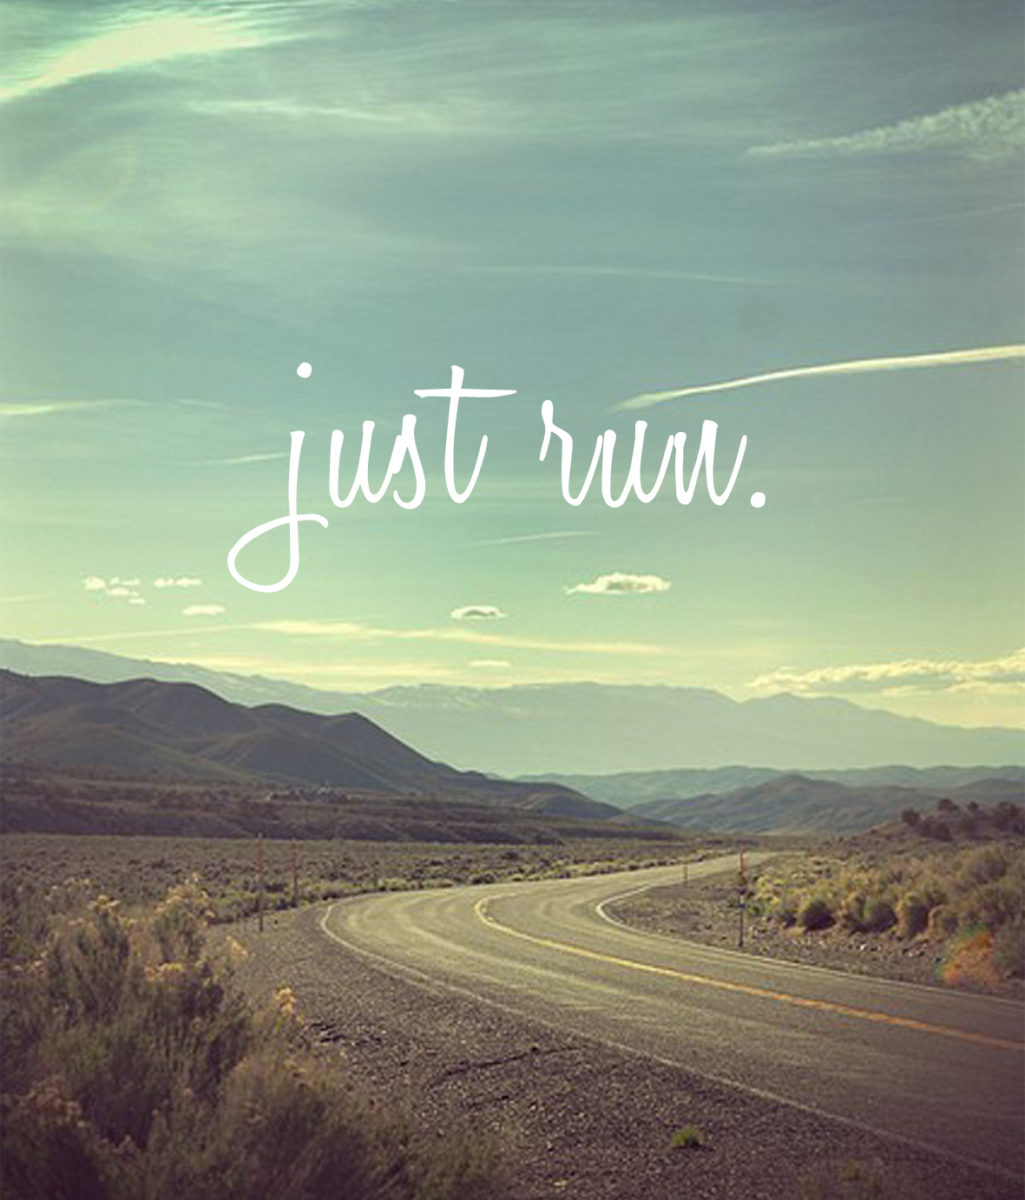 Road with "just run" text